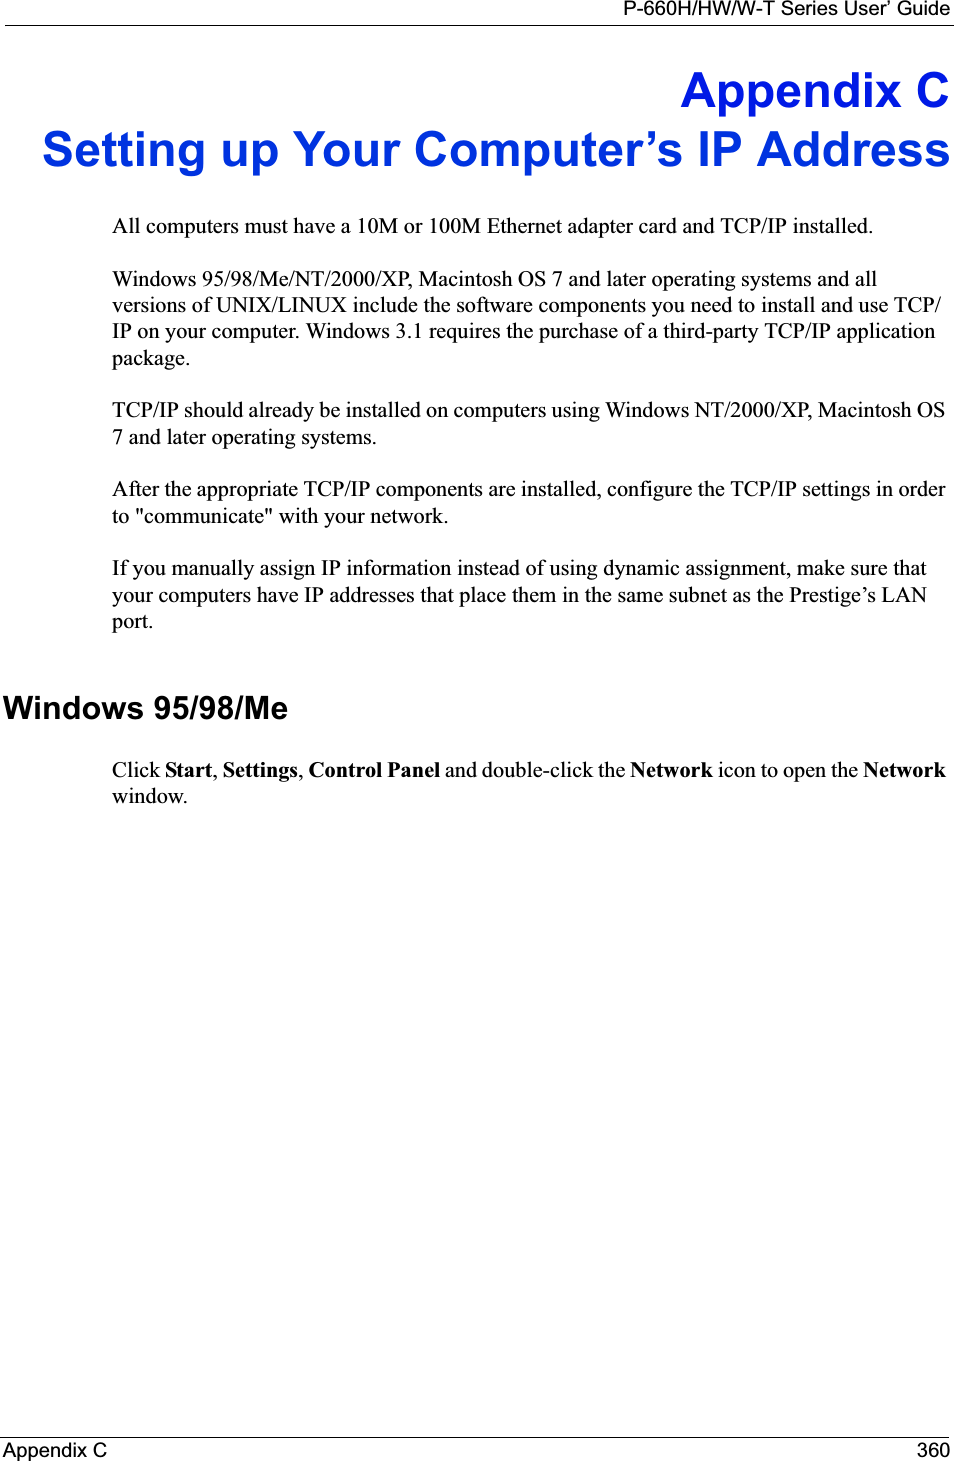 P-660H/HW/W-T Series User’ GuideAppendix C 360Appendix CSetting up Your Computer’s IP AddressAll computers must have a 10M or 100M Ethernet adapter card and TCP/IP installed. Windows 95/98/Me/NT/2000/XP, Macintosh OS 7 and later operating systems and all versions of UNIX/LINUX include the software components you need to install and use TCP/IP on your computer. Windows 3.1 requires the purchase of a third-party TCP/IP application package.TCP/IP should already be installed on computers using Windows NT/2000/XP, Macintosh OS 7 and later operating systems.After the appropriate TCP/IP components are installed, configure the TCP/IP settings in order to &quot;communicate&quot; with your network. If you manually assign IP information instead of using dynamic assignment, make sure that your computers have IP addresses that place them in the same subnet as the Prestige’s LAN port.Windows 95/98/MeClick Start,Settings,Control Panel and double-click the Network icon to open the Network window.